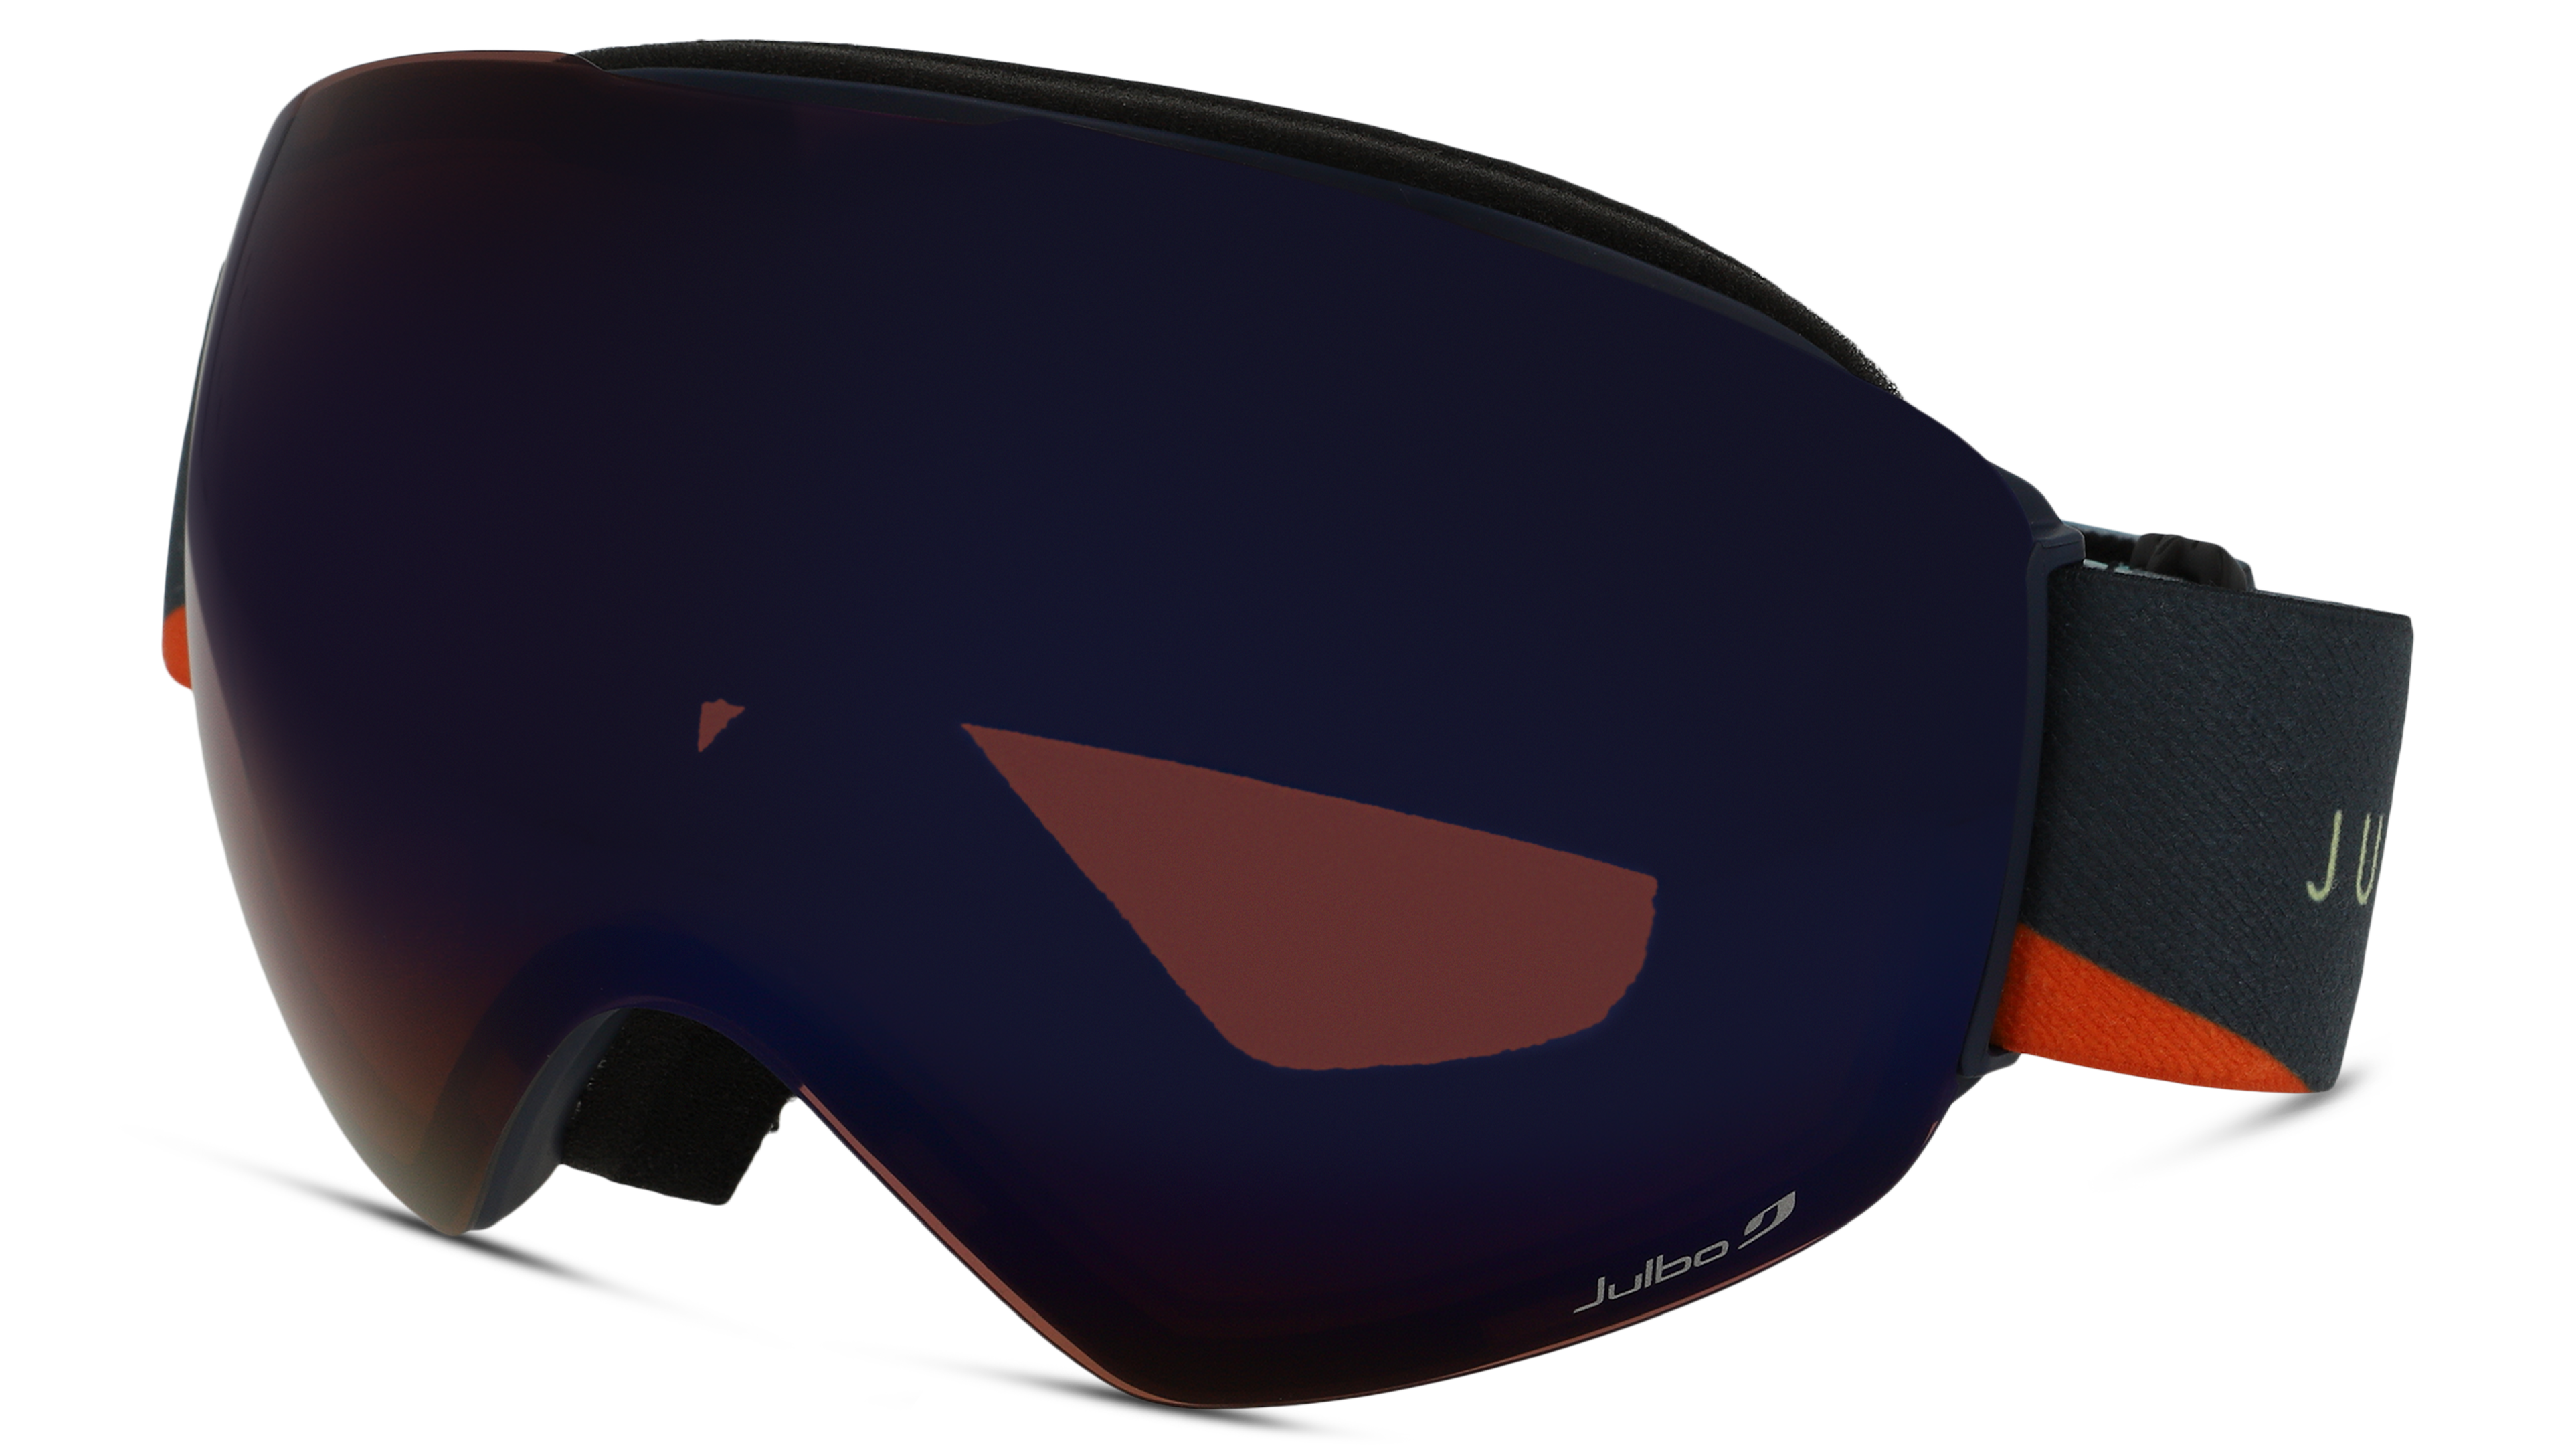 [products.image.angle_left01] JULBO J760 SPACELAB 12